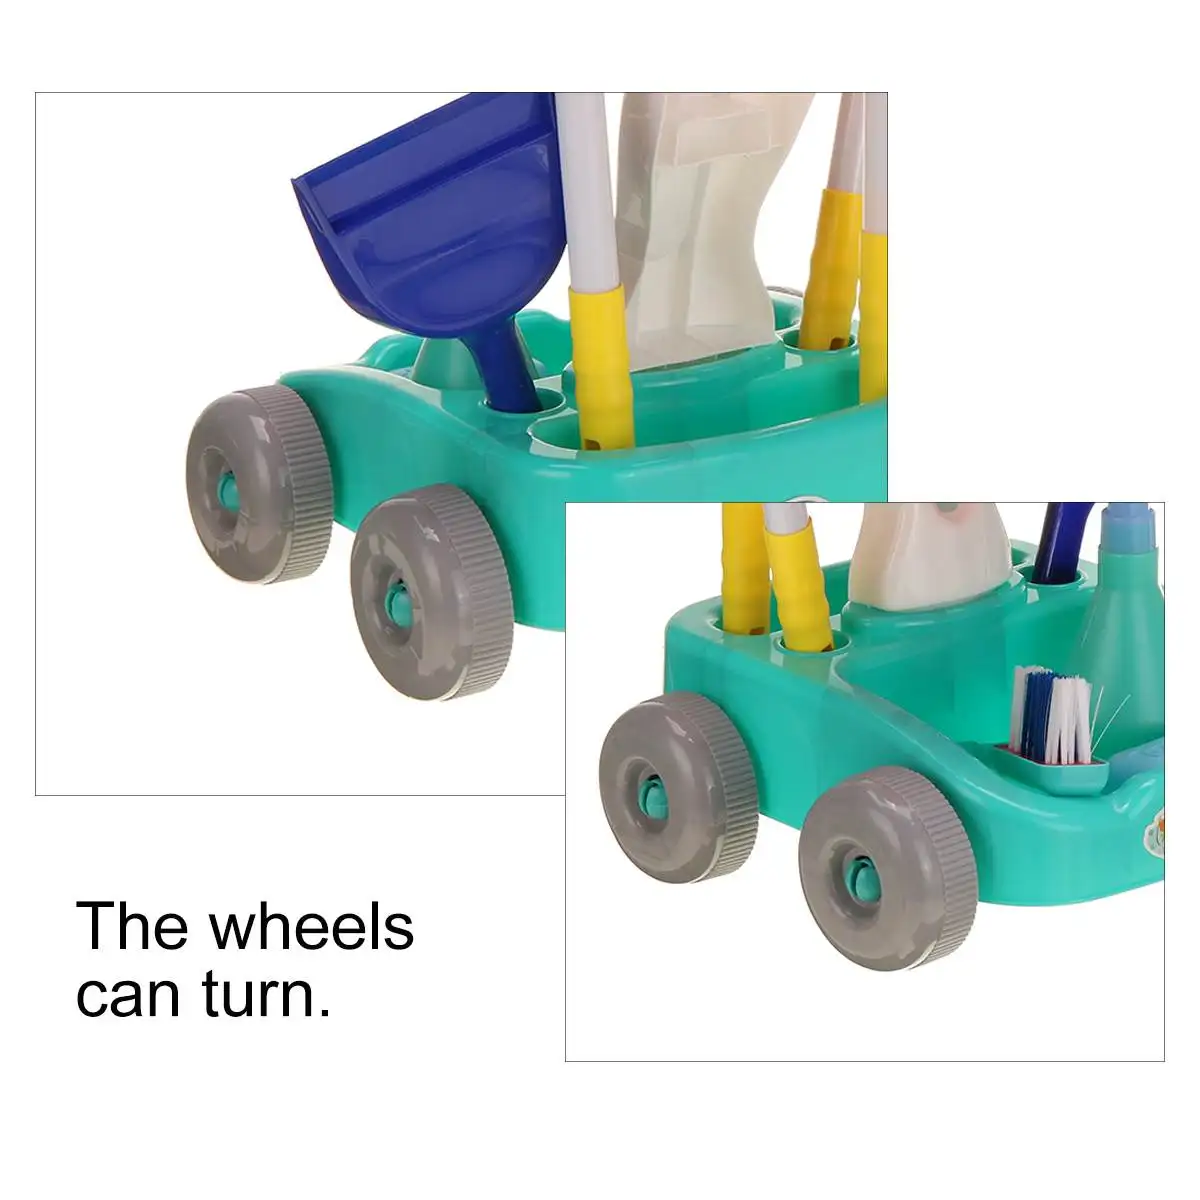 

Mini Broom Mopping Cart Toy Set Child Cleaner Cleaning Tool Play Children Simulation Household Educational Toys Housekeeping